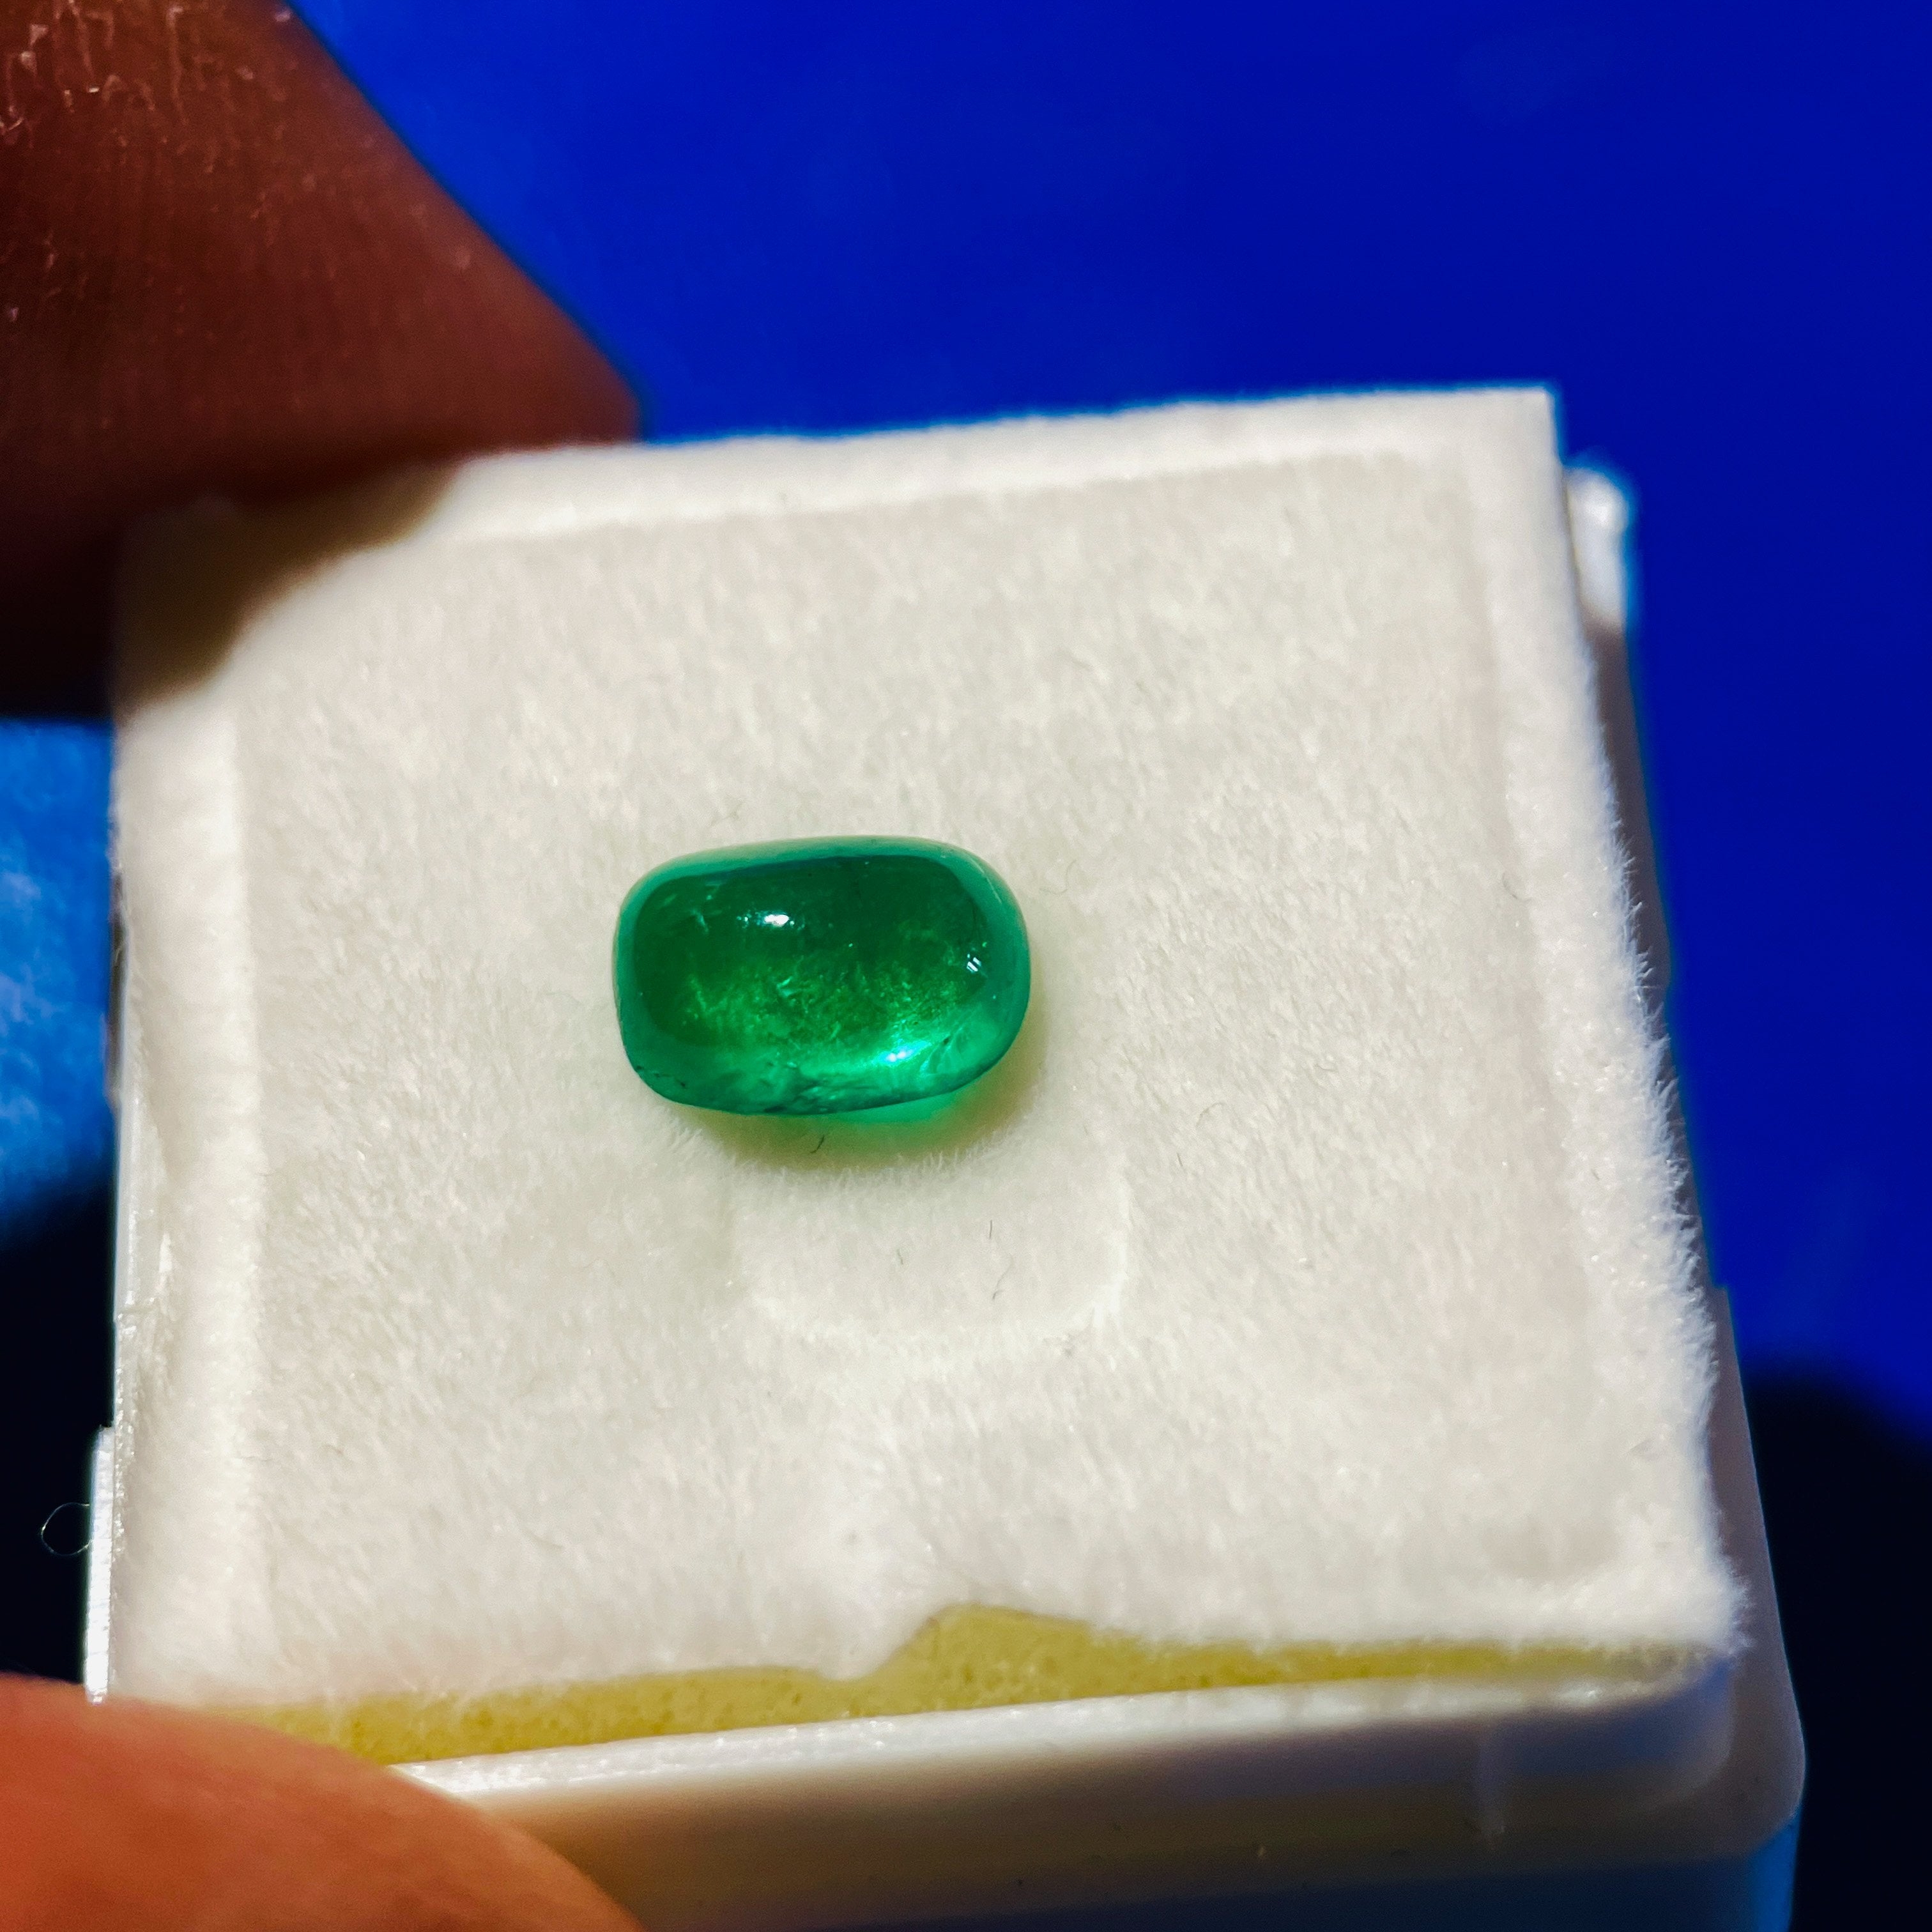 0.82Ct Emerald Tanzania No Oil Added But Some Labs May Describe The Stone As Minor Oil Or